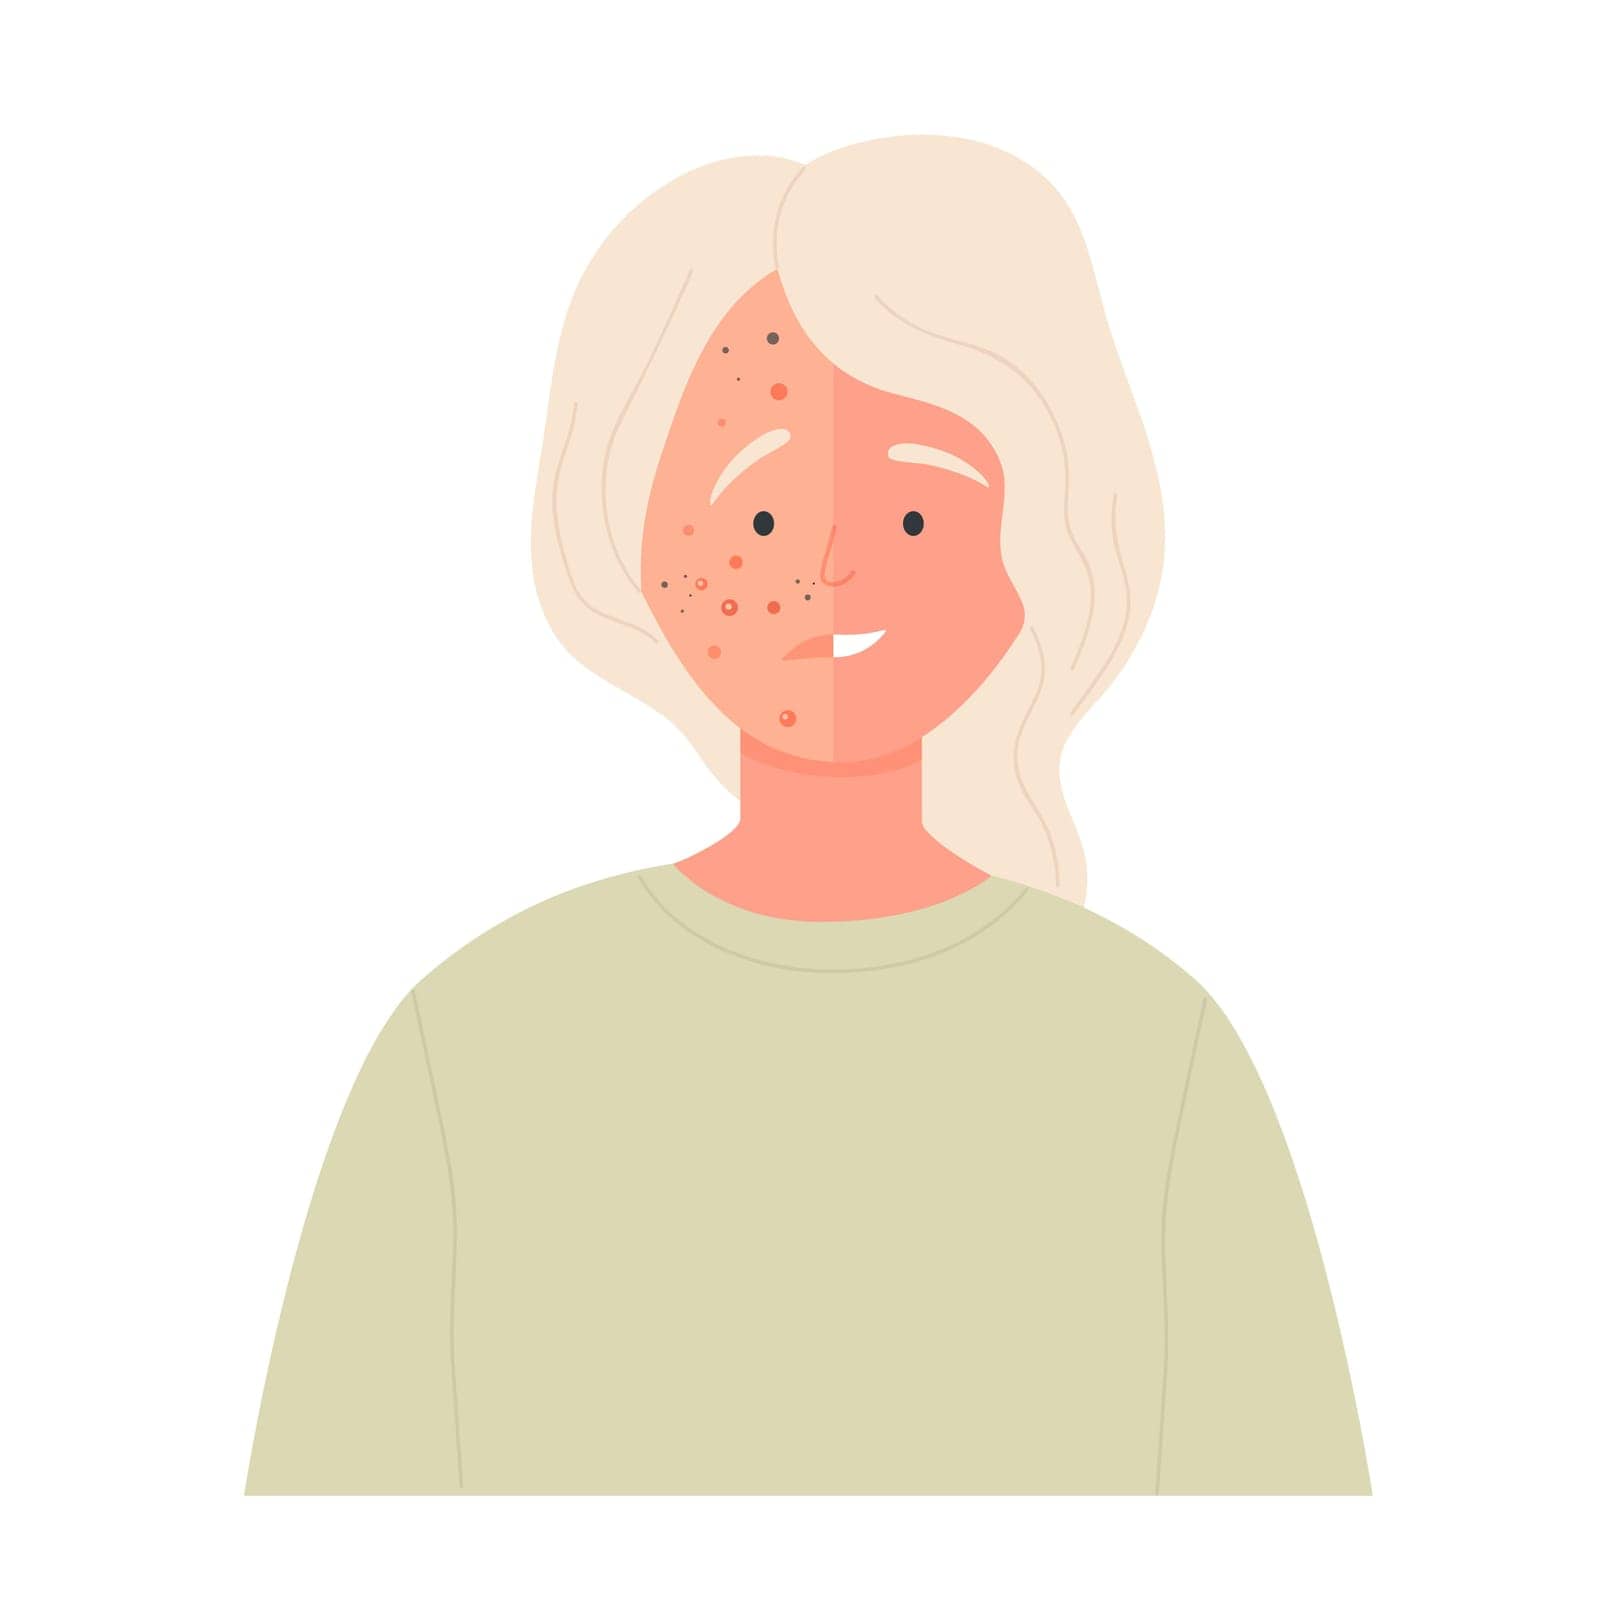 Acne face before and after treatment. Sad girl with dermis problems and clean treated skin flat vector illustration